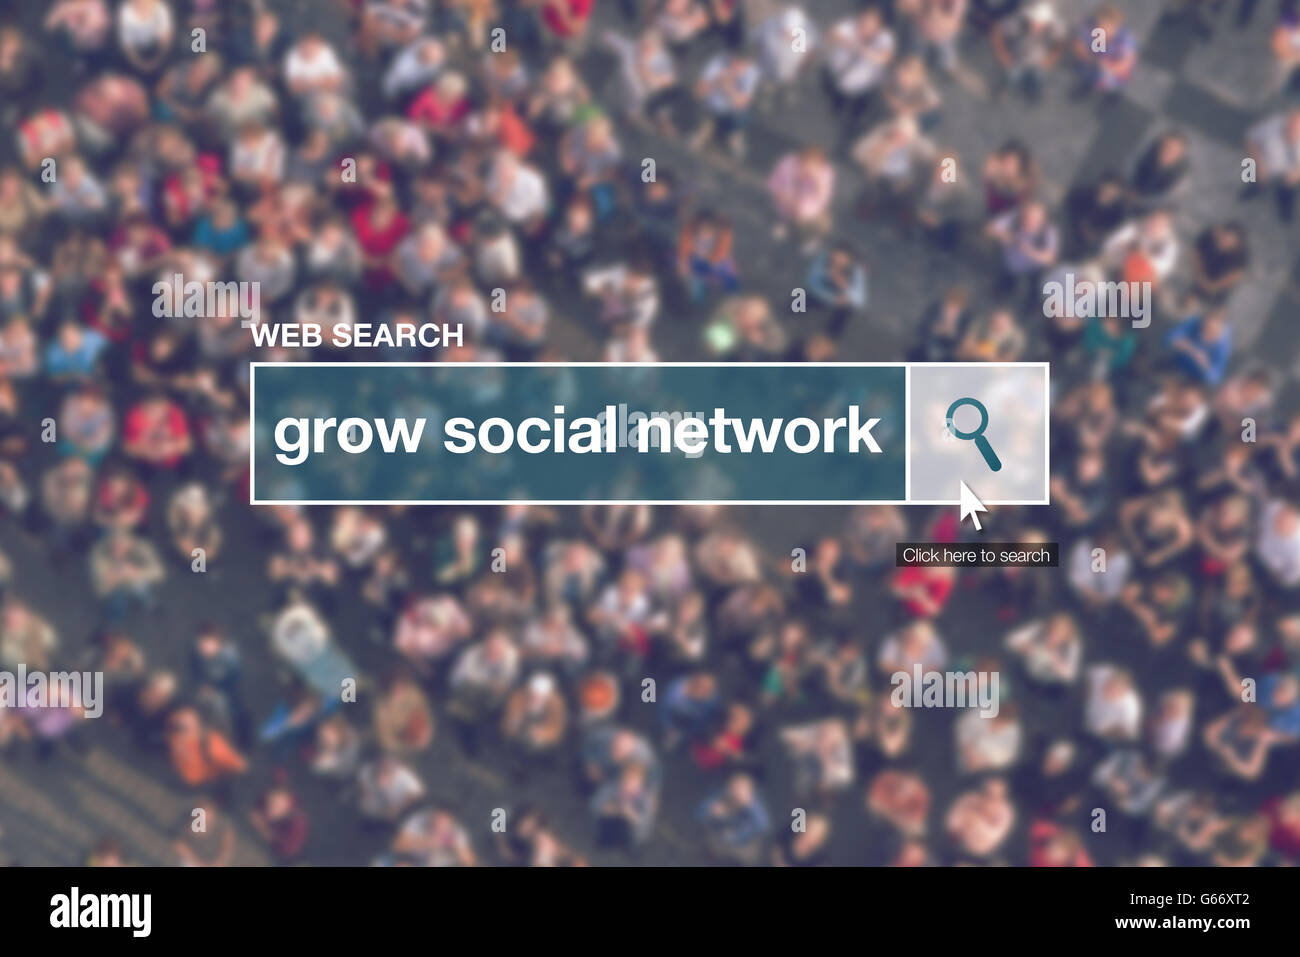 Grow social network - web search bar glossary term in internet glossary. Stock Photo